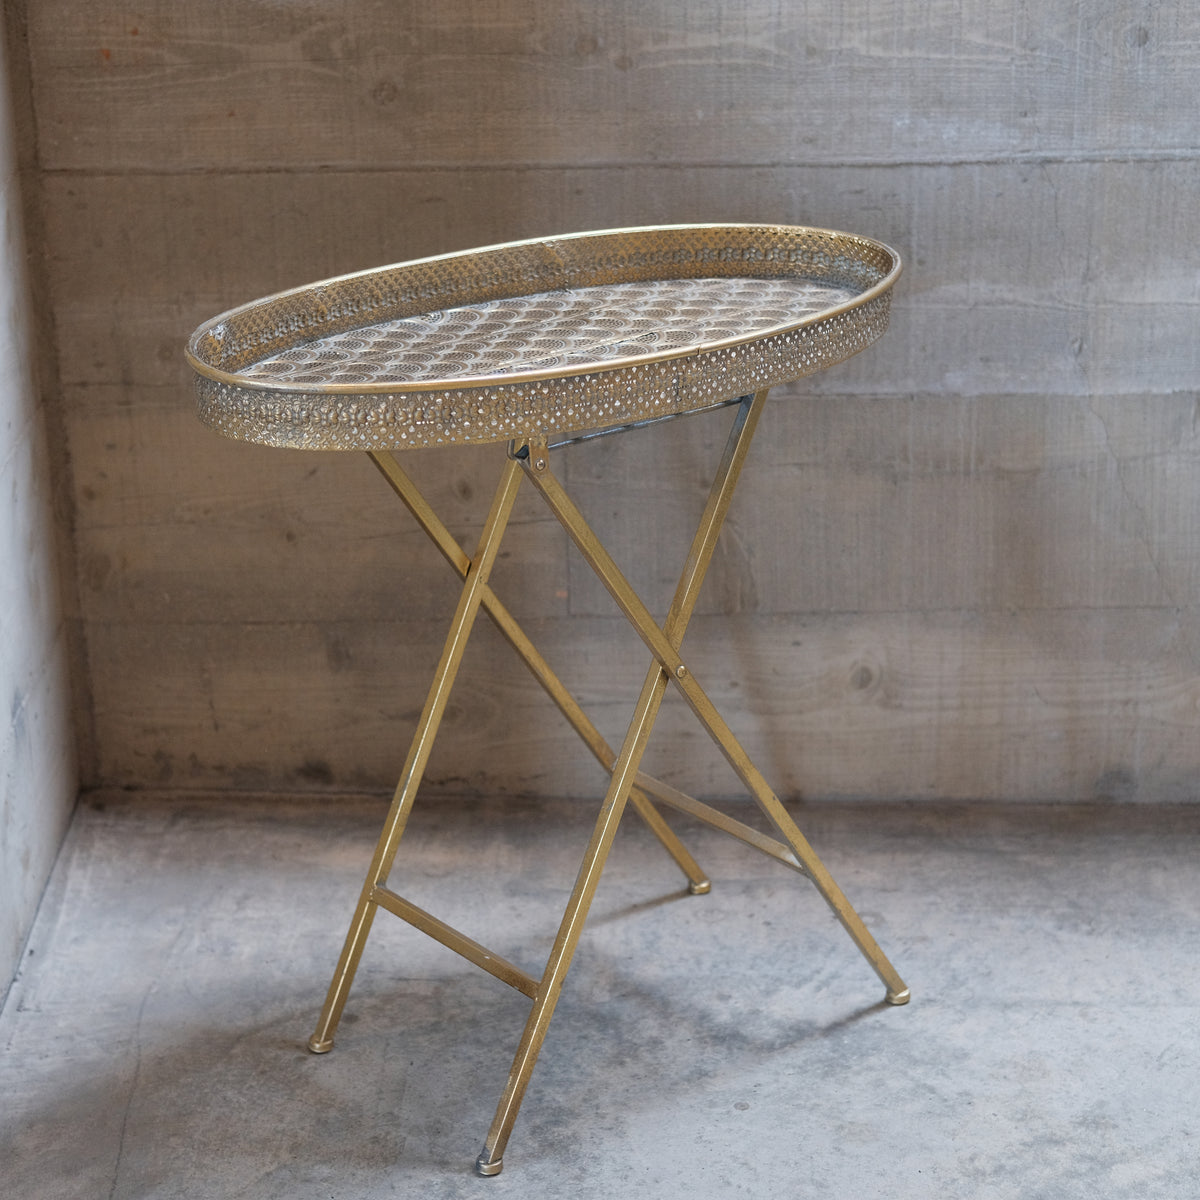 Oval Ornate Gold Metal Tray Table – Snape Maltings